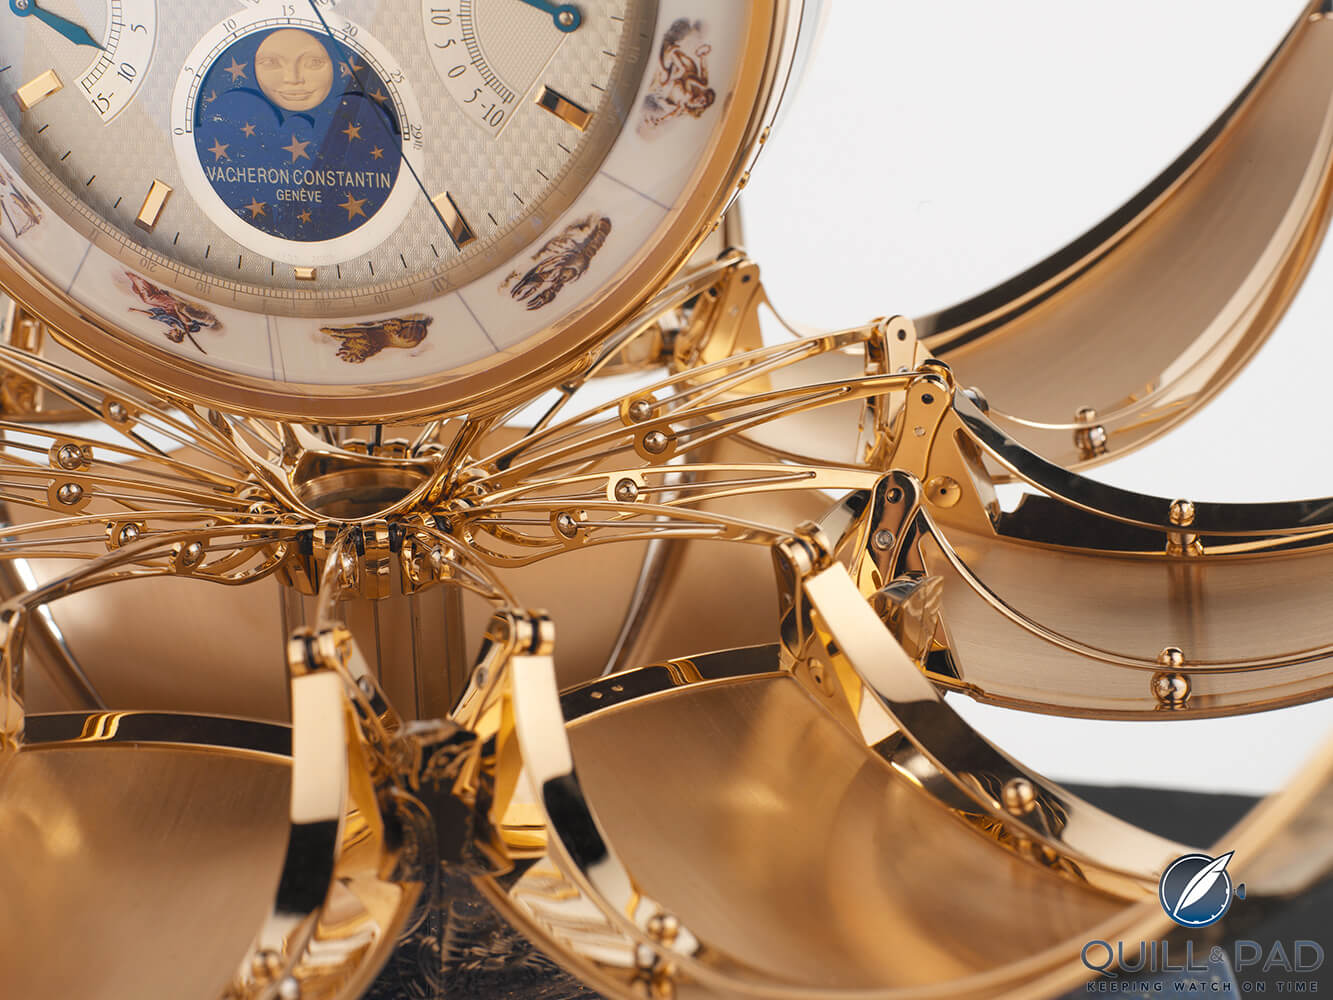 Beautiful lever controls for the opening and closing of the globe of the Vacheron Constantin Esprit des Cabinotiers